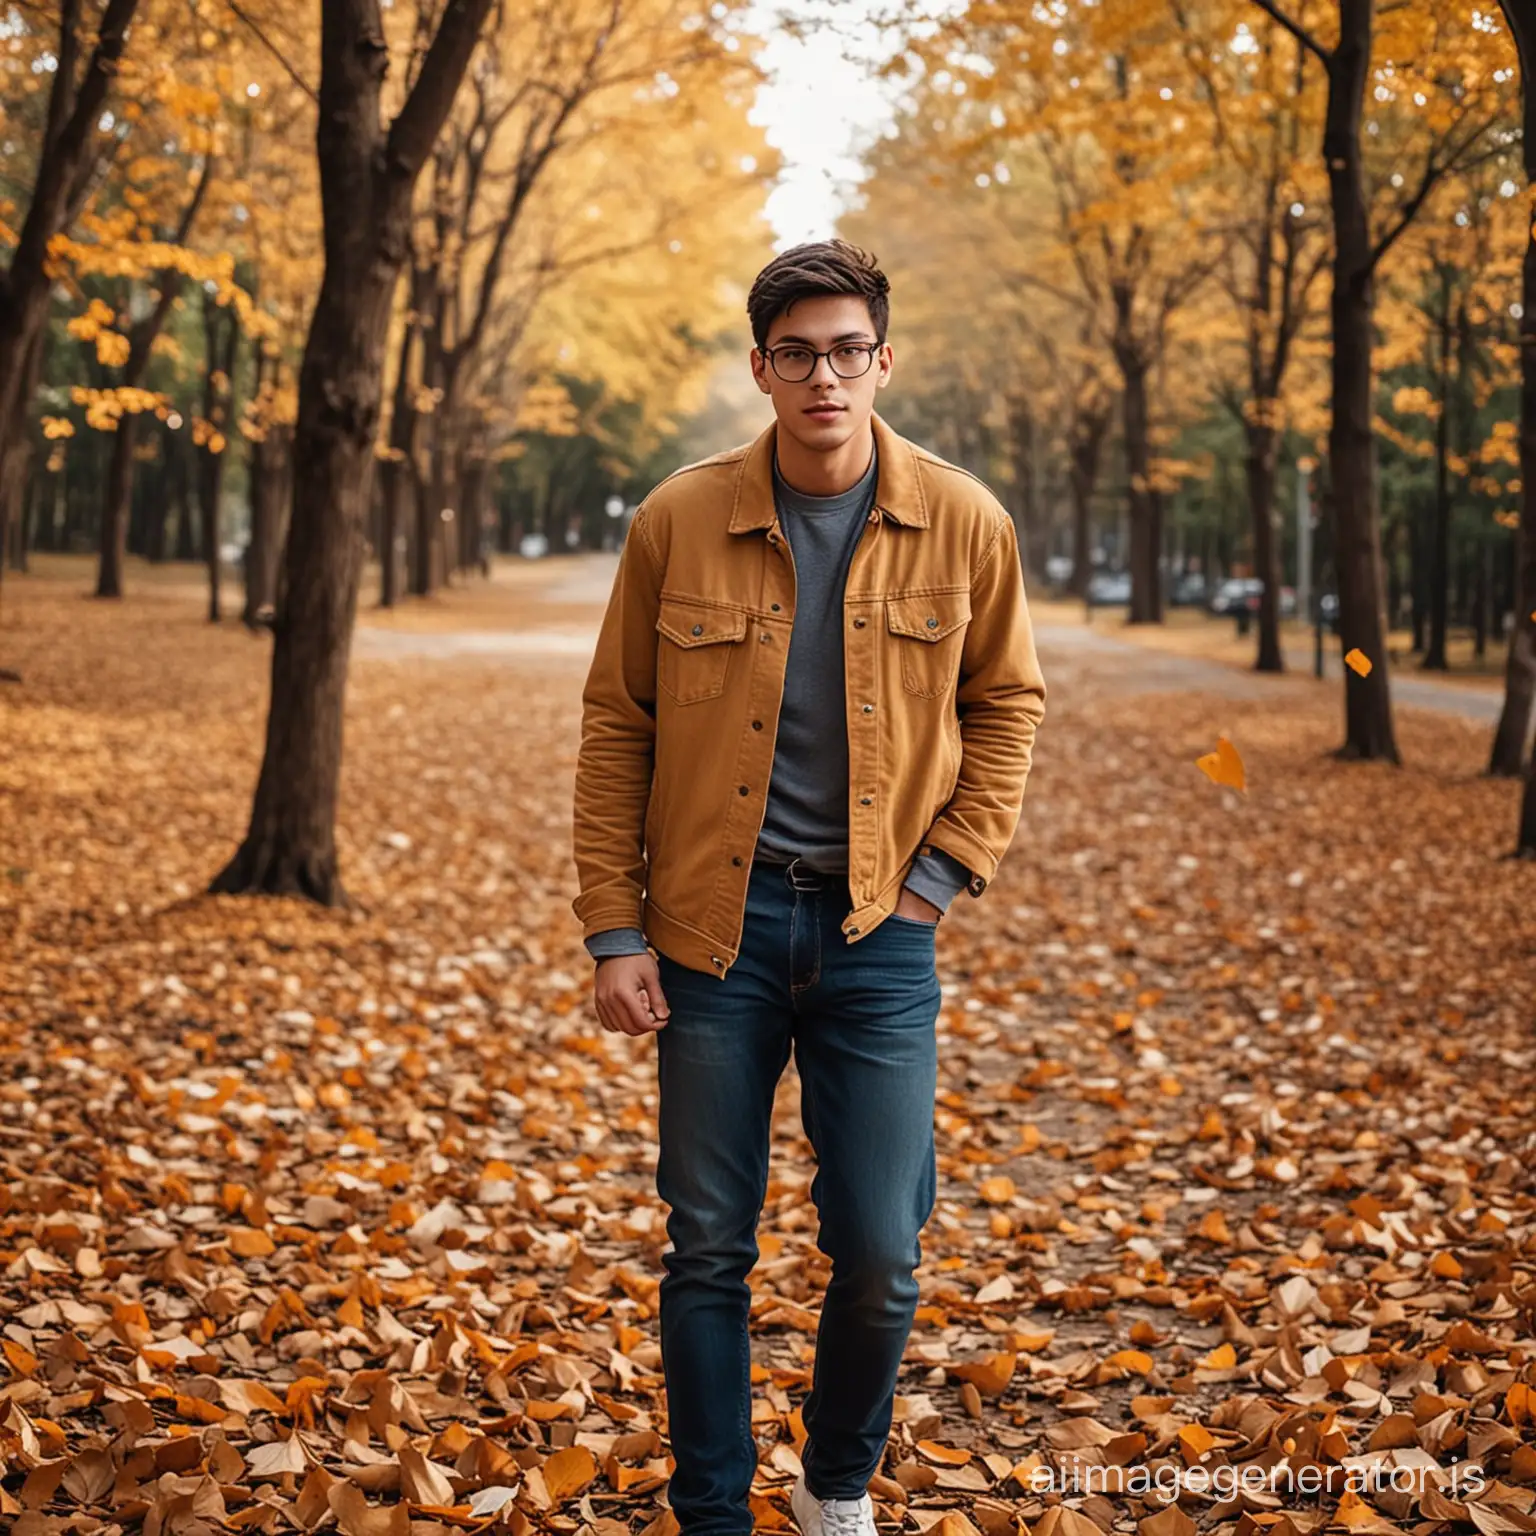 full body shoot, wide shoot, cinematic portrait of handsome 20 years old man, glasses, brown eyes, detailed face, with very short cut black hair, wearing denim jeans and white sneakers Tommy Hilfiger shoes, walking on the ground, dry elk leaves floating in the air, autumn scenery, peaceful atmosphere, warm sunlight, serene expression, joy, playful mood, golden leaves, orange and brown tones, gentle breeze, falling leaves, natural surroundings, soft grass, relaxed pose, scattered leaves around, crisp sound of leaves, vibrant colors, rustic setting, nature's beauty, quiet moment, outdoor activity, carefree youth, leafy ground, motion blur for leaves, wide-angle perspective, tranquil ambiance, childlike wonder, nostalgic feeling, enchanting scenery